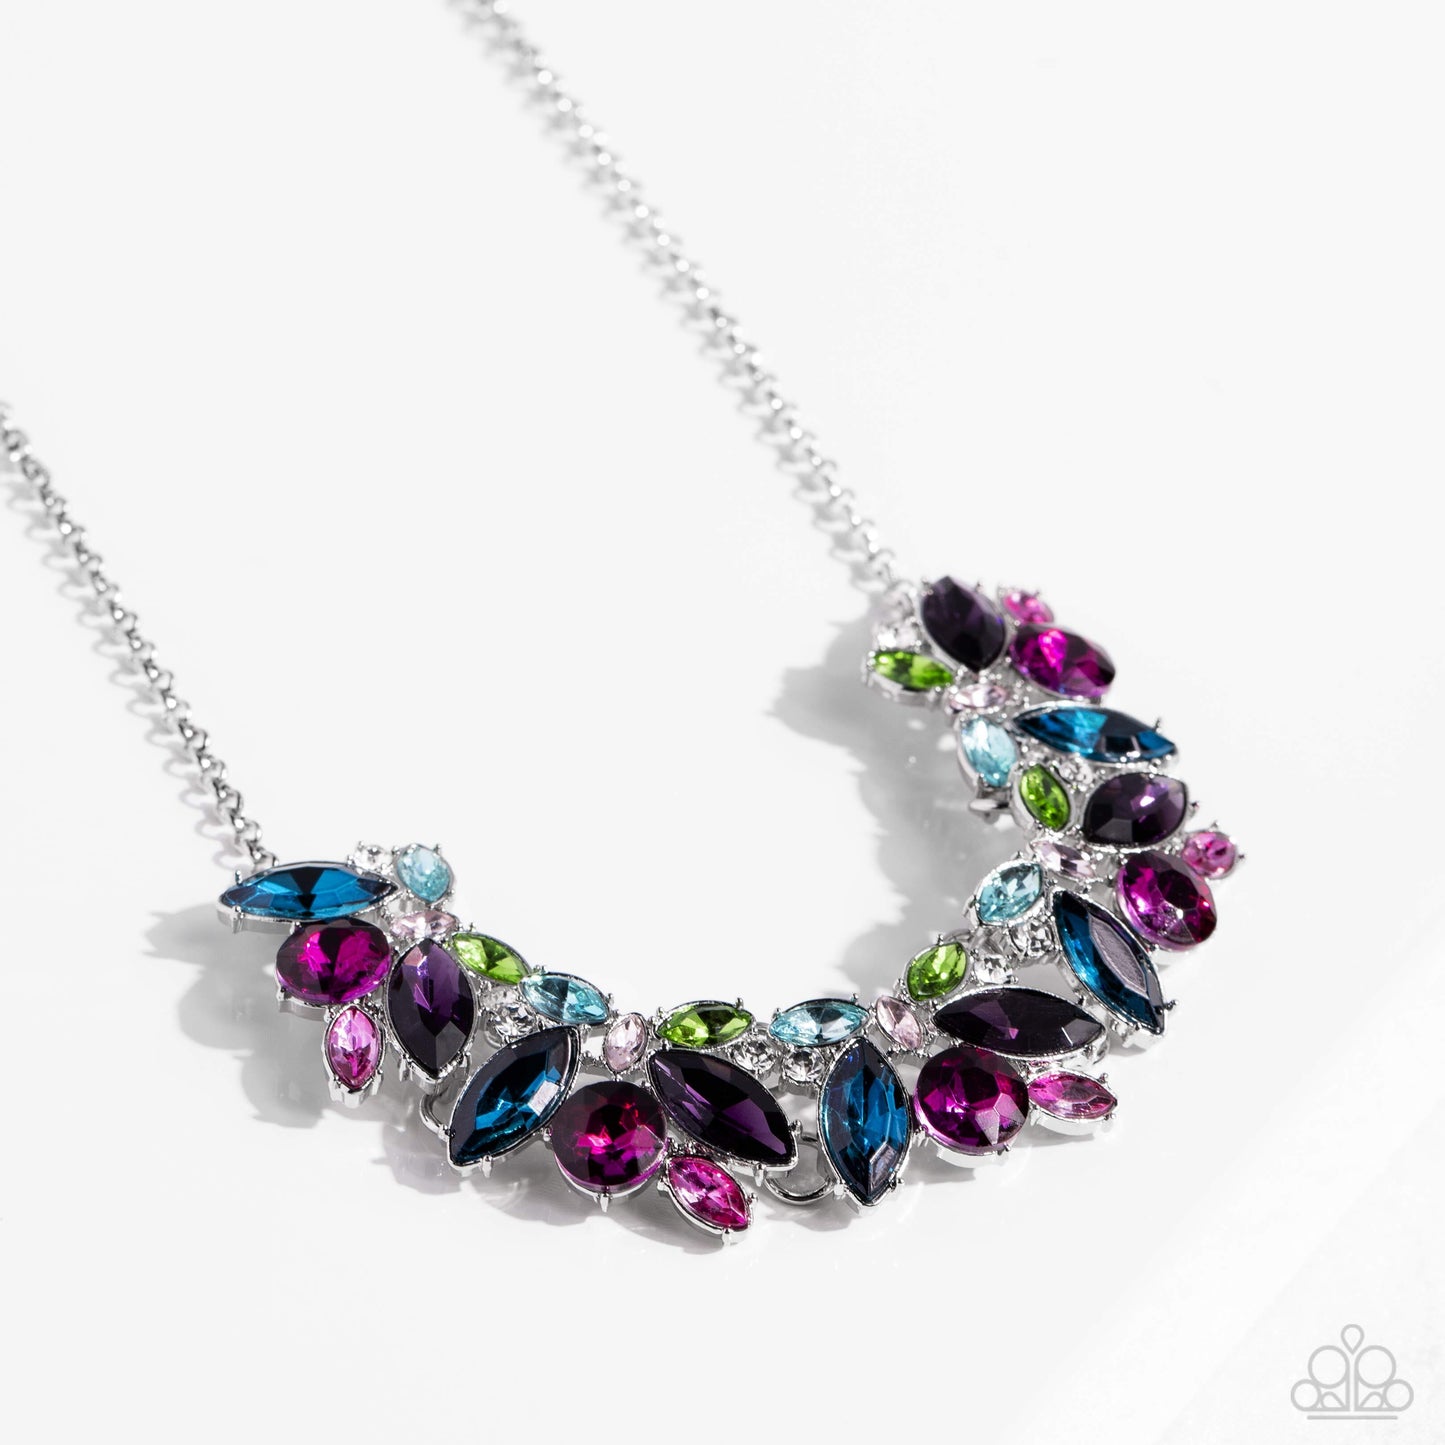 Paparazzi Accessories Crowning Collection - Multi Featuring pronged silver fittings, a sparkly series of marquise-cut rhinestones in varying sizes and opacities are splashed in hues of purple, blue, light blue, baby pink, pink, and green as they fan out b